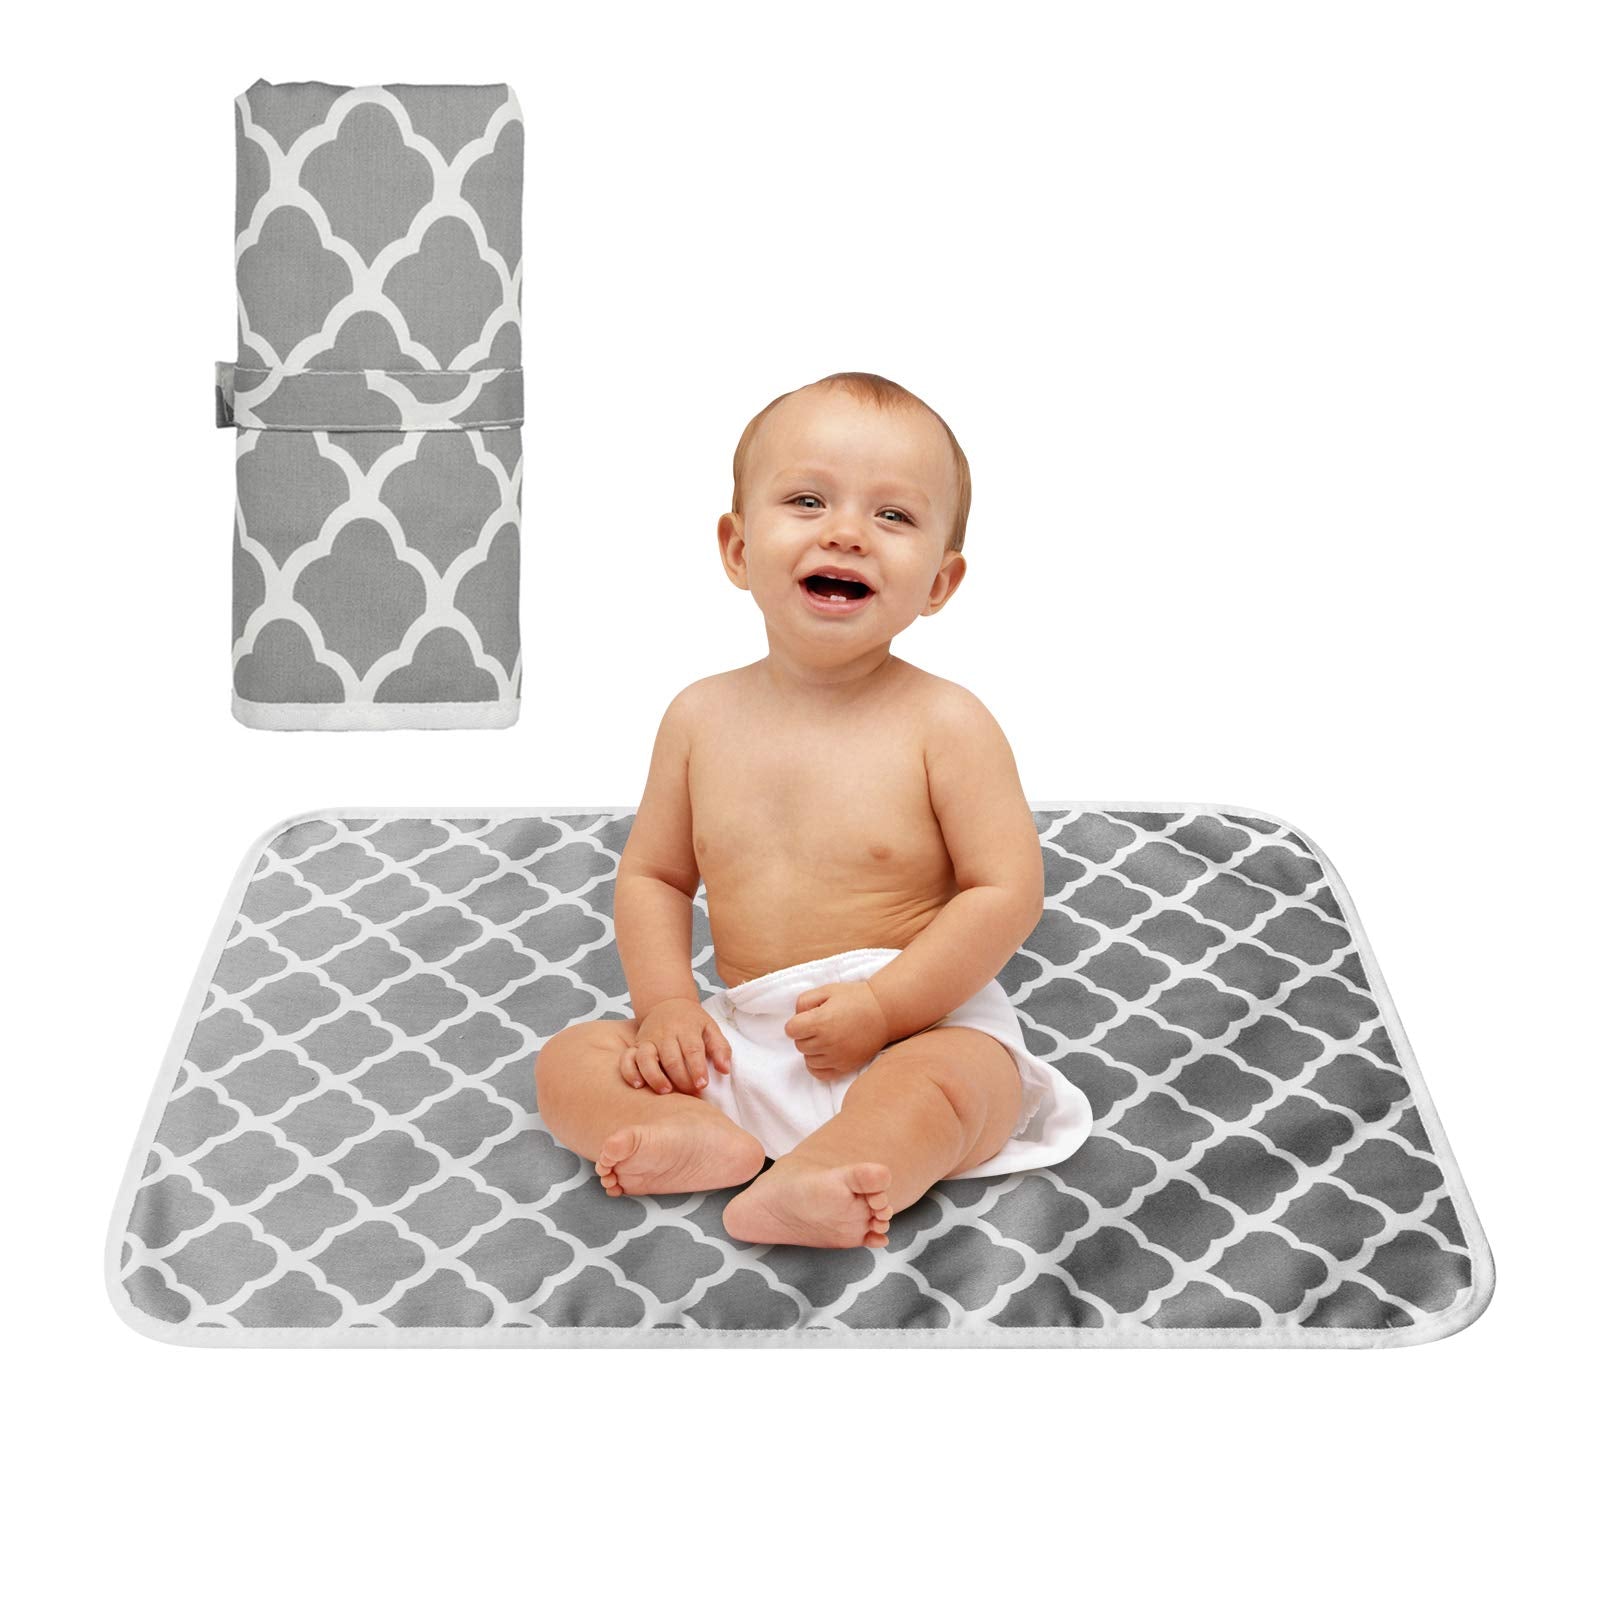 Portable Nappy Changing Mat, Baby Changing Mat Portable Travel Changing Mats Waterproof for Baby Newborn & Toddlers, Foldable Infant Baby Urinal Pad Waterproof, Gray（70 * 50cm）